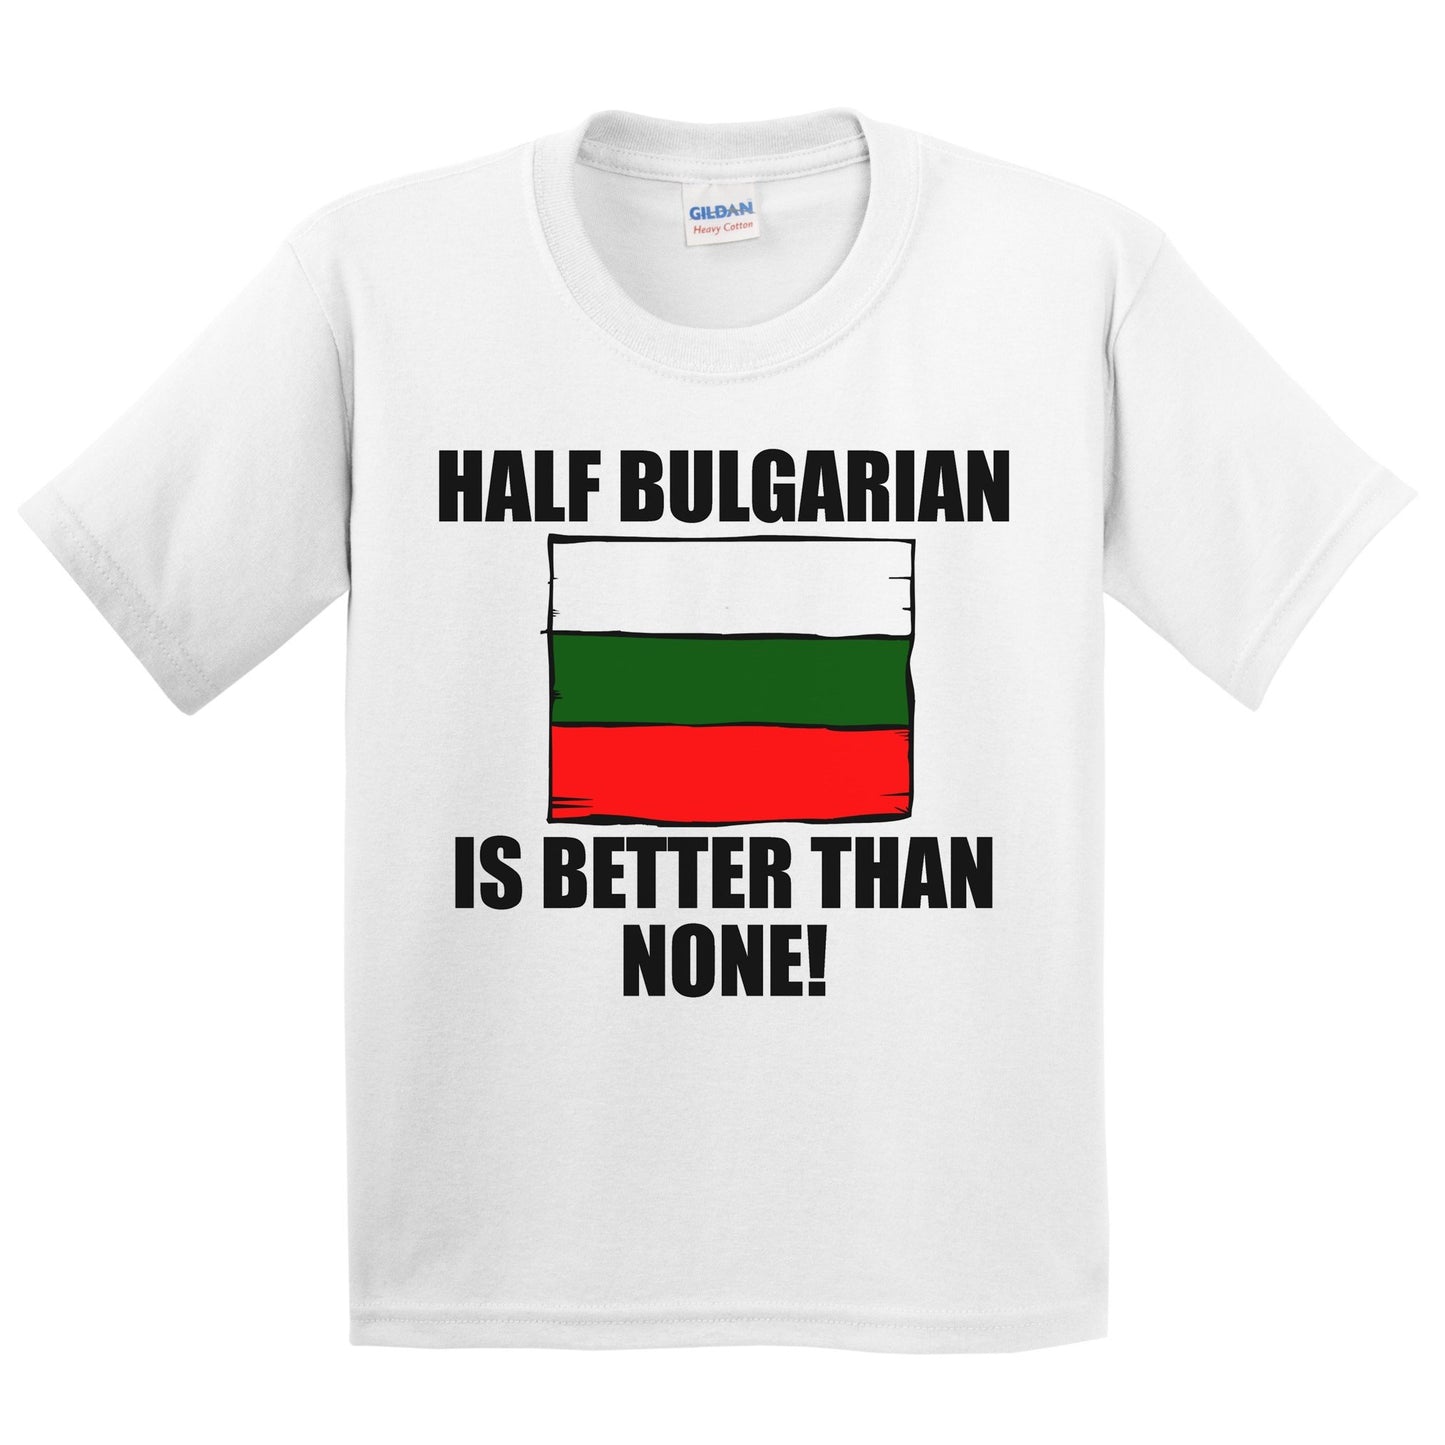 Half Bulgarian Is Better Than None Kids Youth T-Shirt